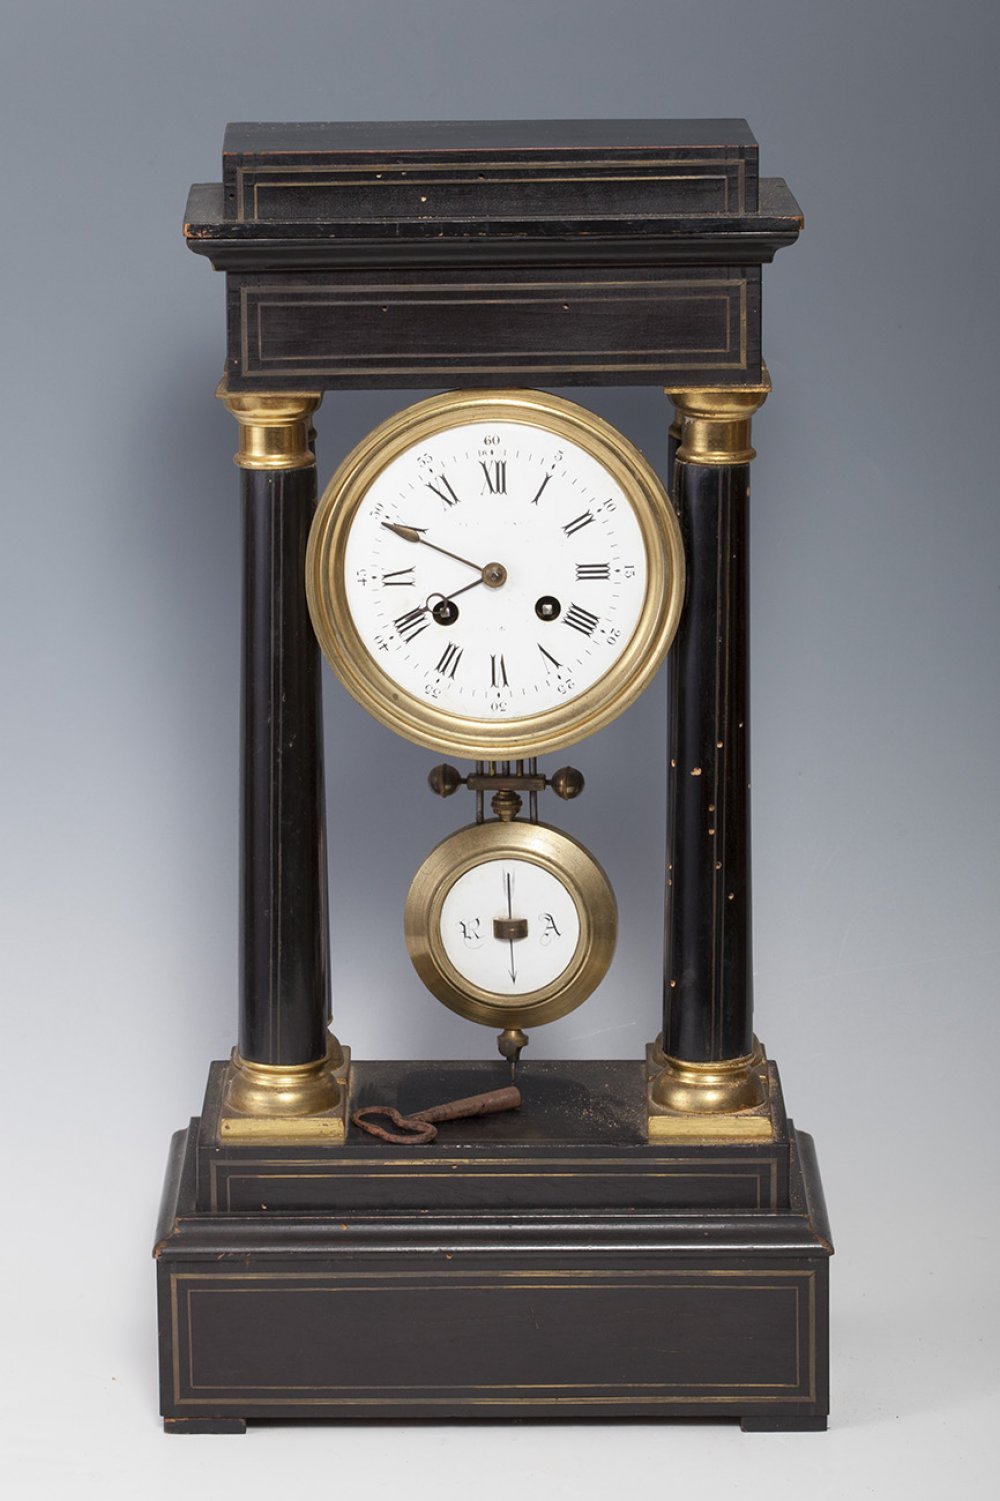 French school, 19th century.Empire clock in wood and gilt marquetry.Presents key. Needs